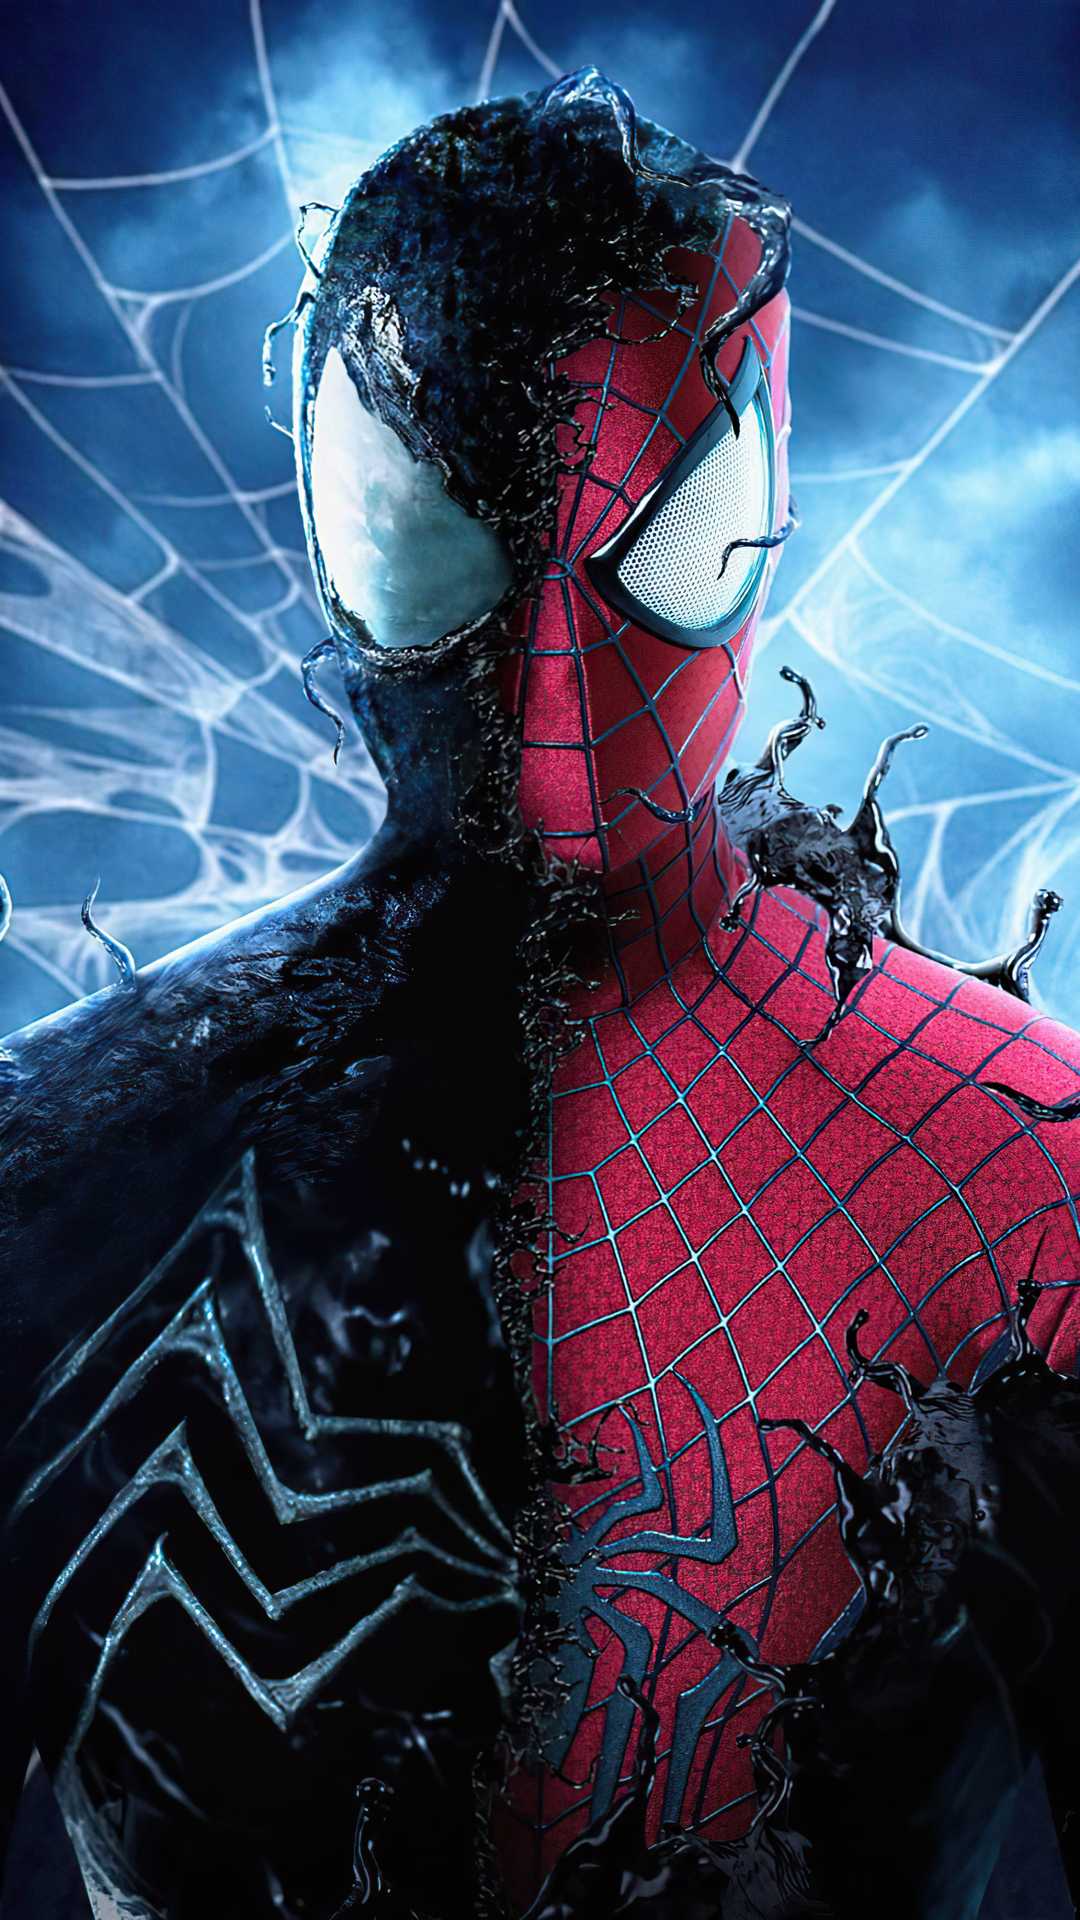 The Amazing Spider-Man 2 wallpaper 1080x1920 for iPhone 6 - Andrew Garfield